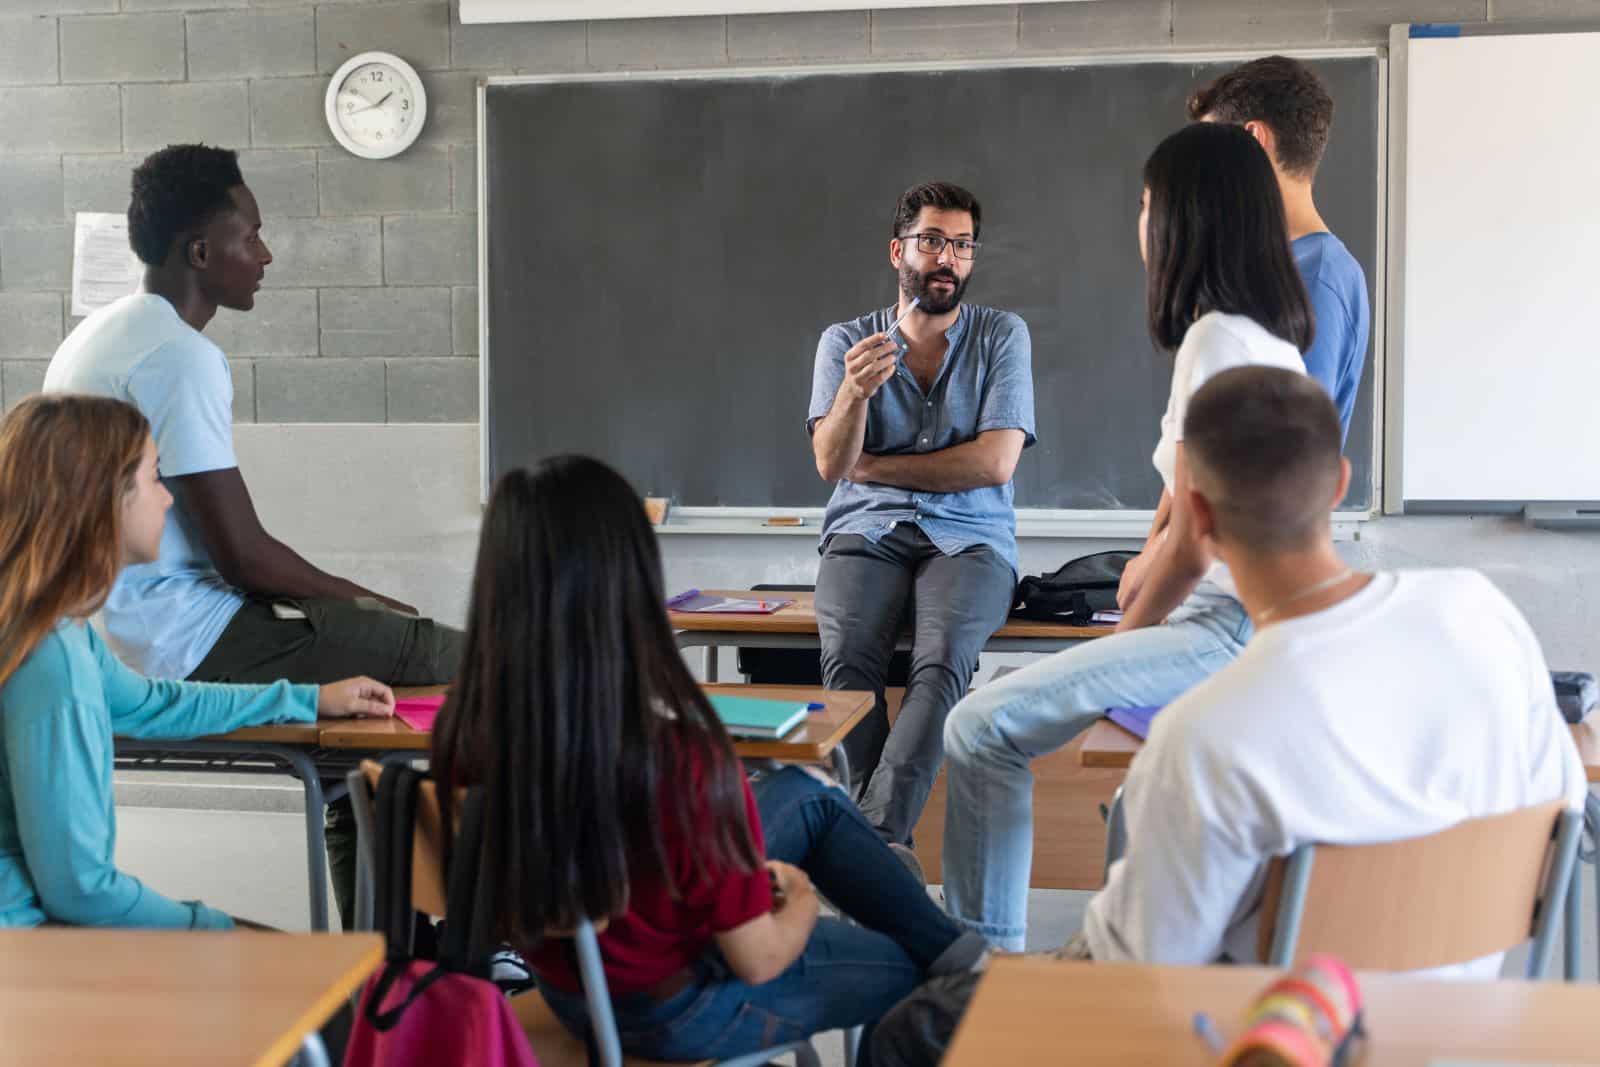 Image Credit: Shutterstock / EF Stock <p><span>Research shows that diverse educational environments enhance the learning experiences of all students, not just those from underrepresented groups.</span></p>